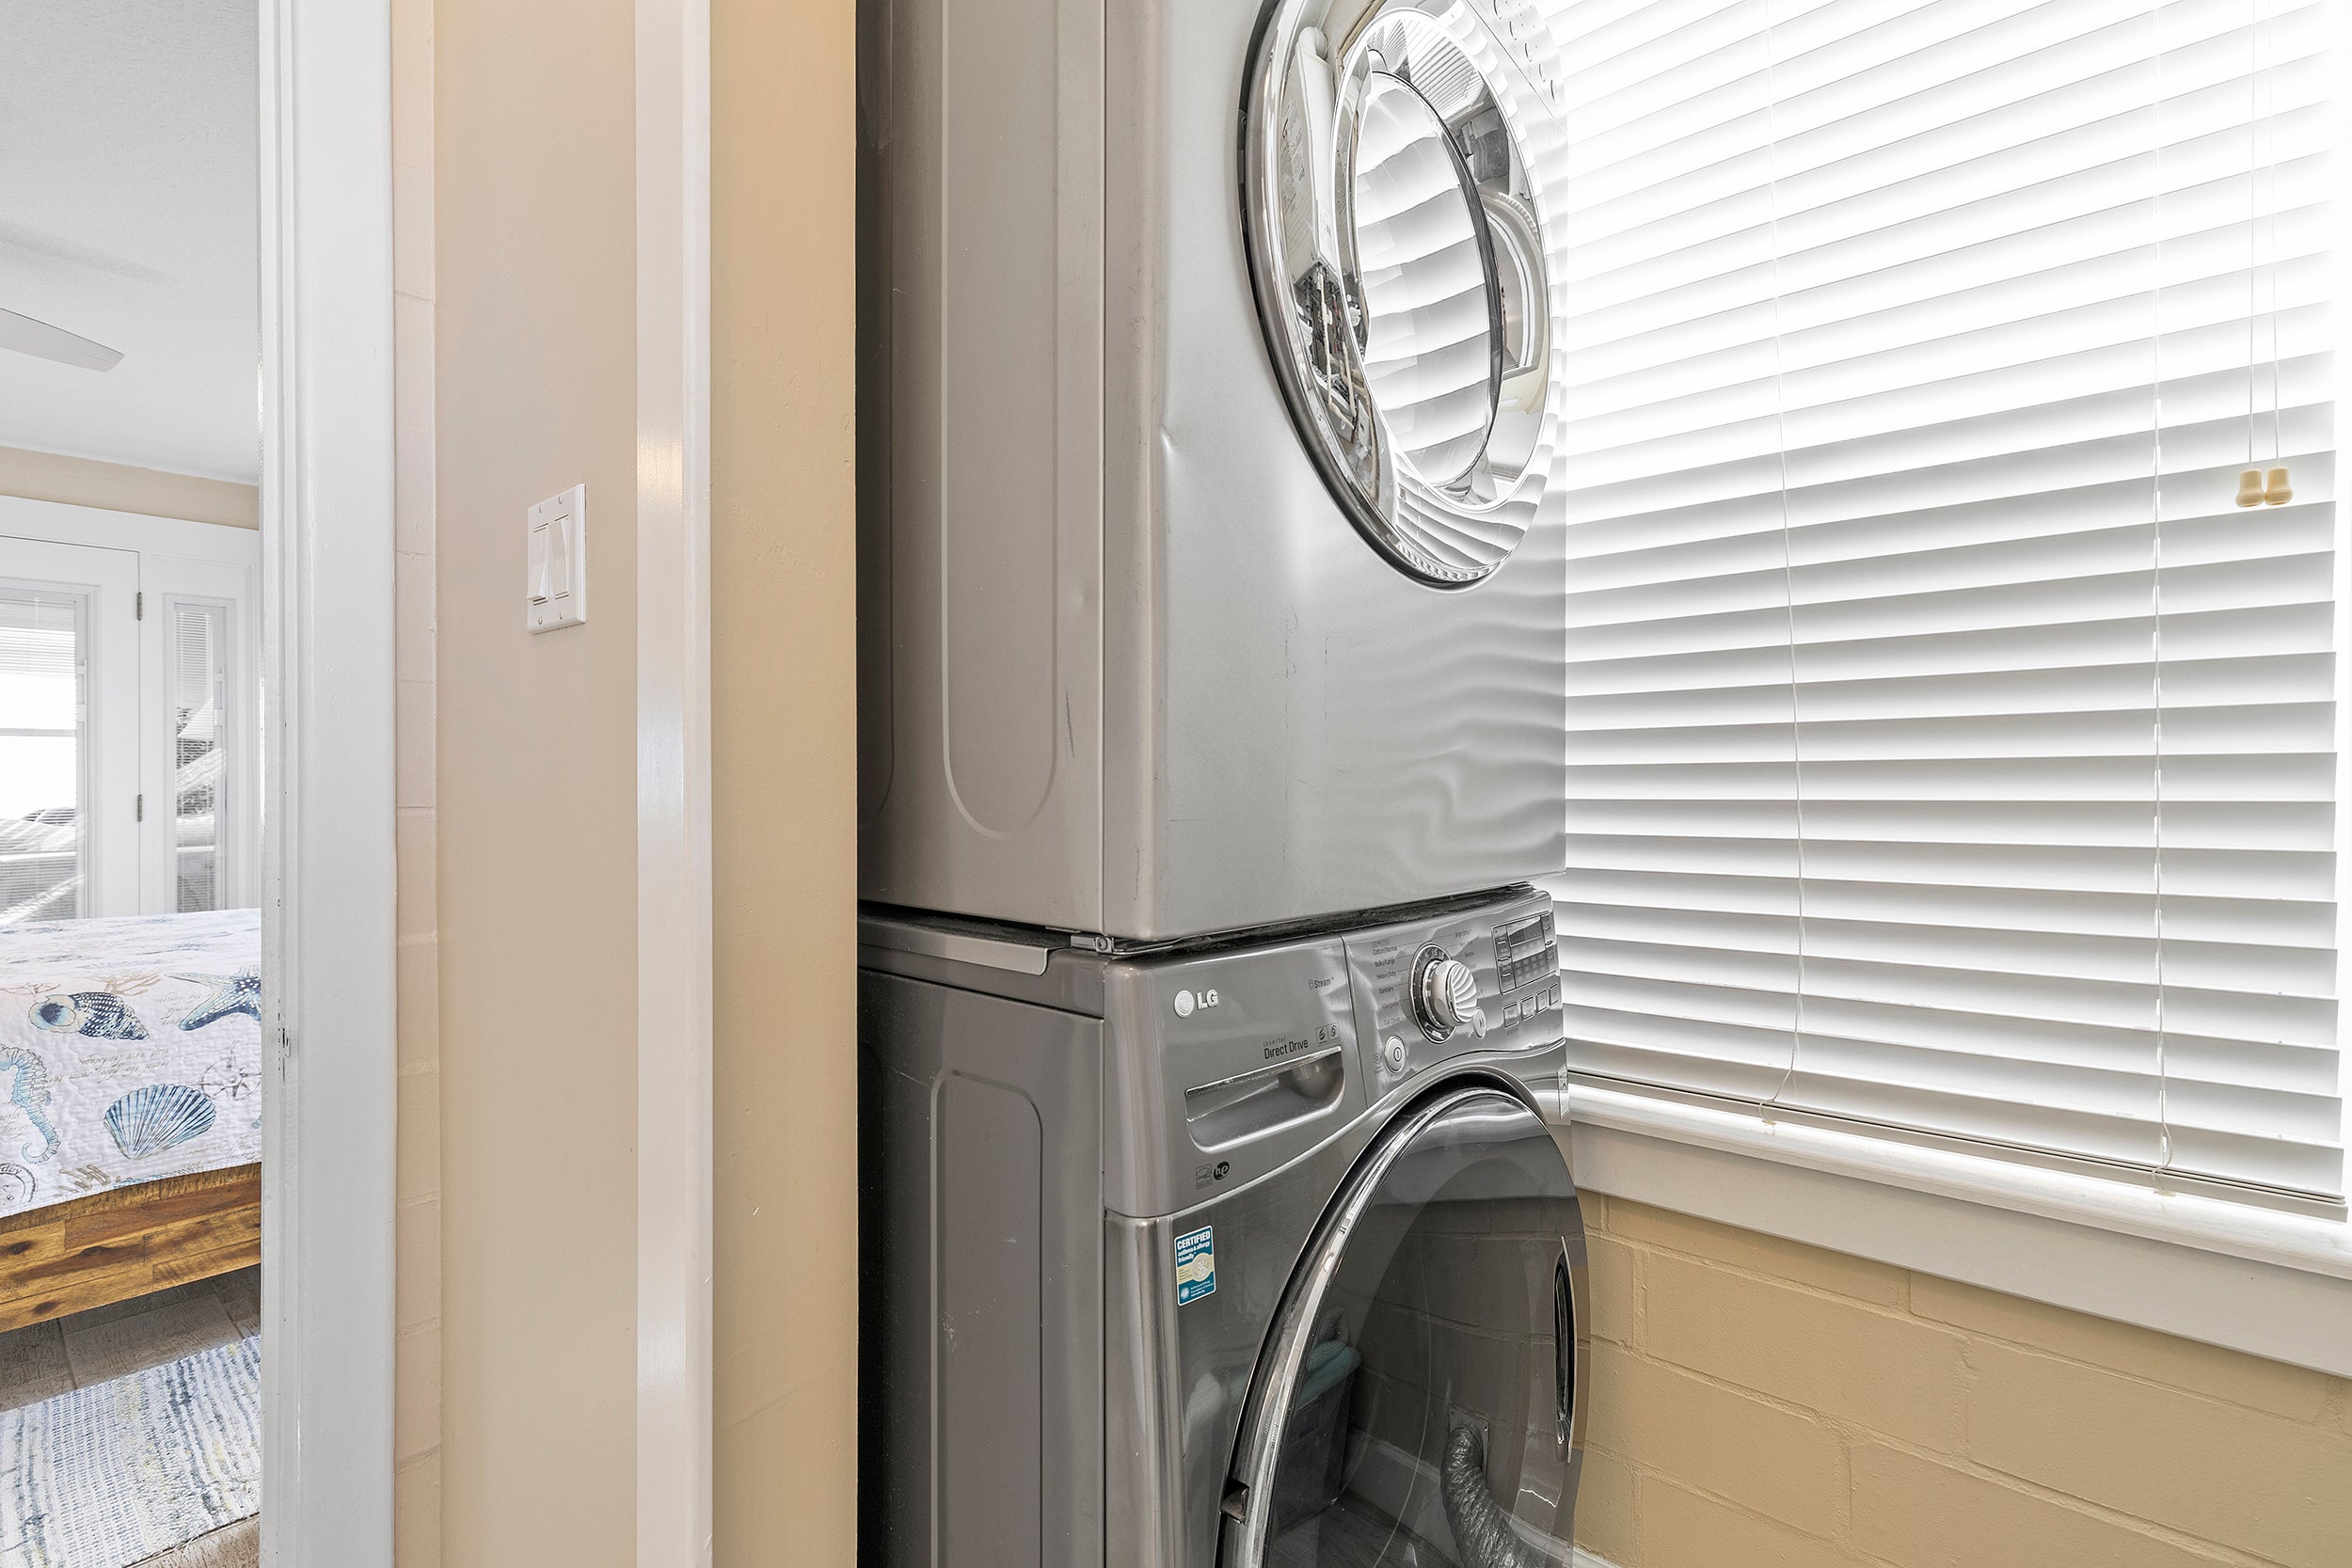 Stackable washer/dryer